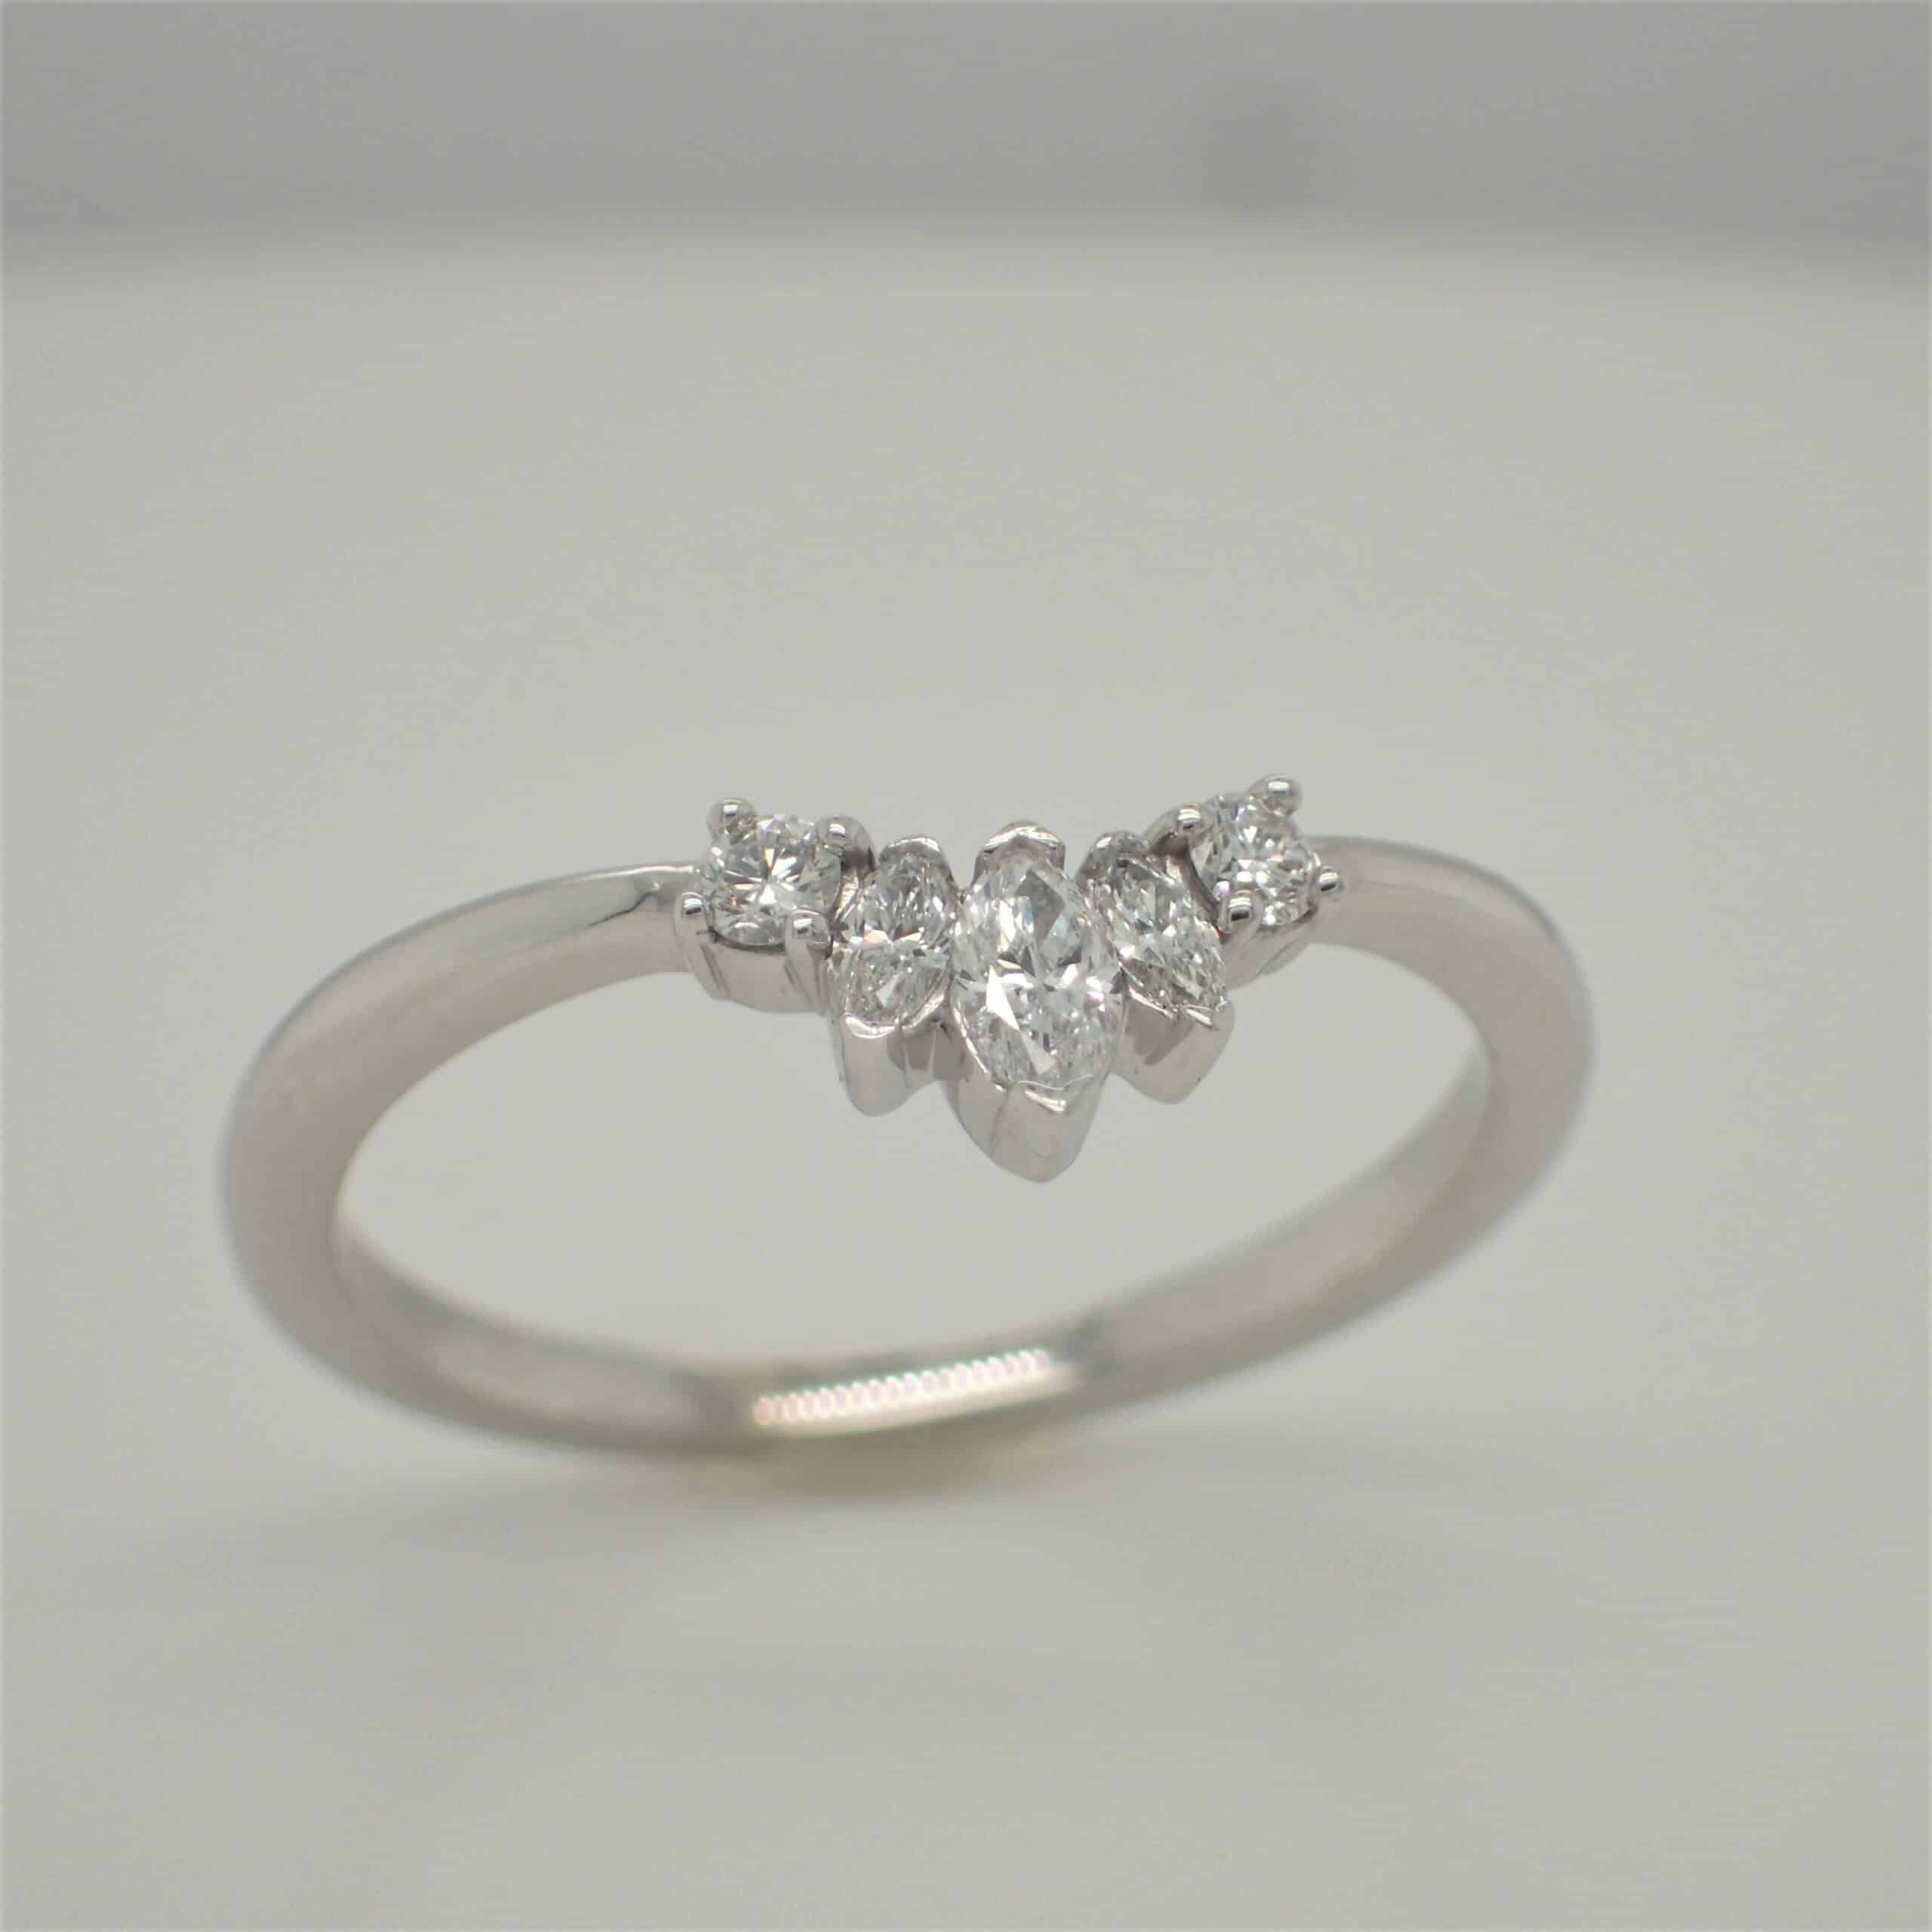 Fitted diamond ring